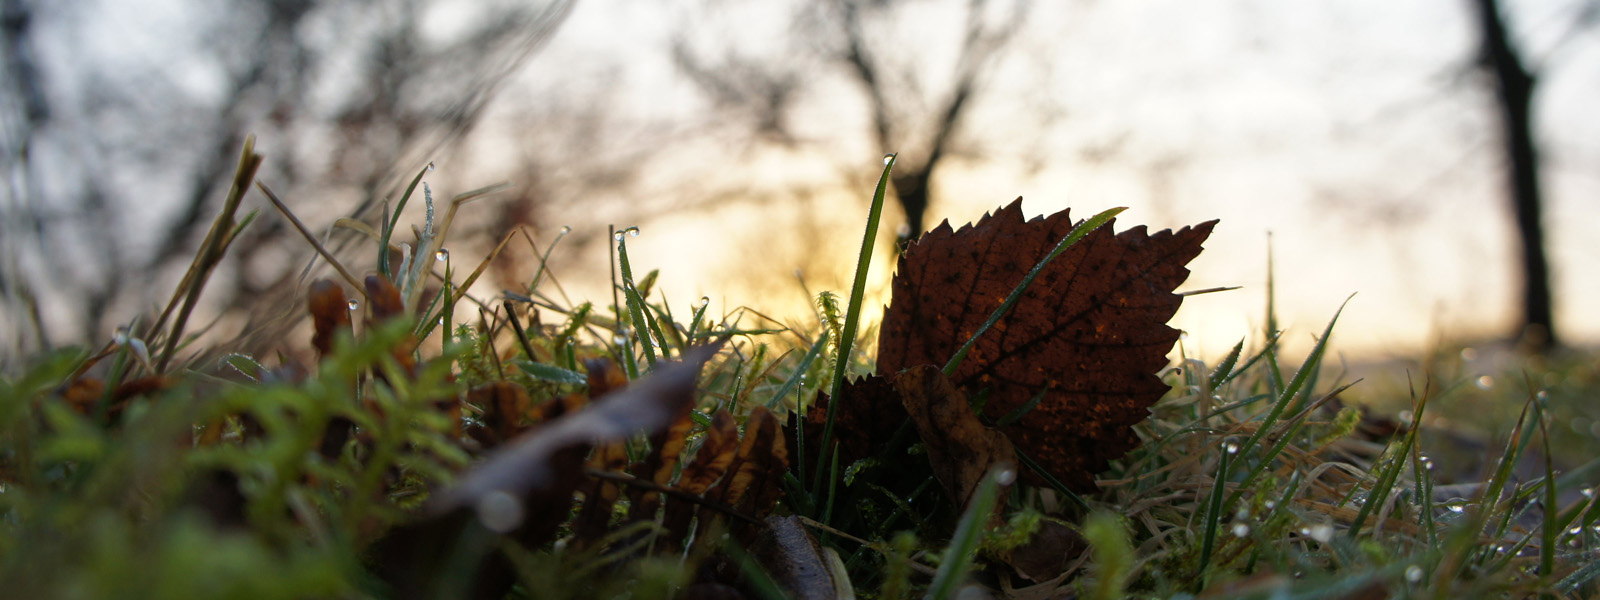 Leaf on the grass in the sunrise